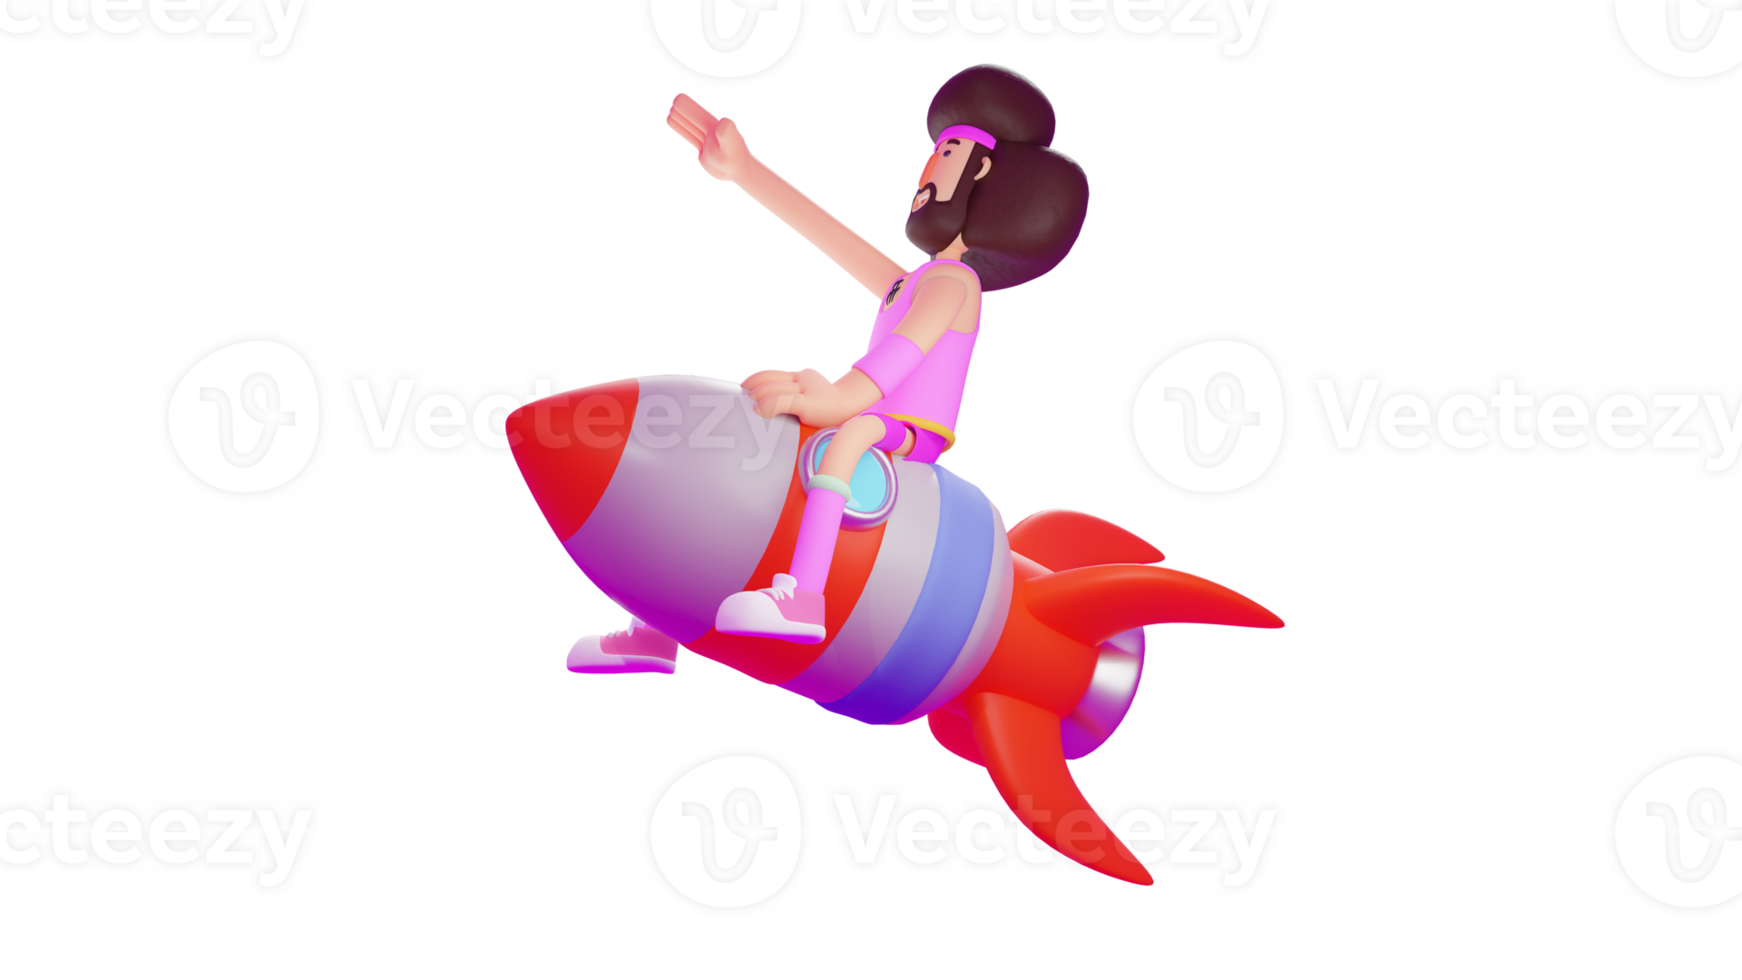 3D Illustration. Funny Men 3D cartoon character. Men in costumes ride a giant rocket and fly high. The man lifted him ahead of the sign he was ready to fly. 3D cartoon character png